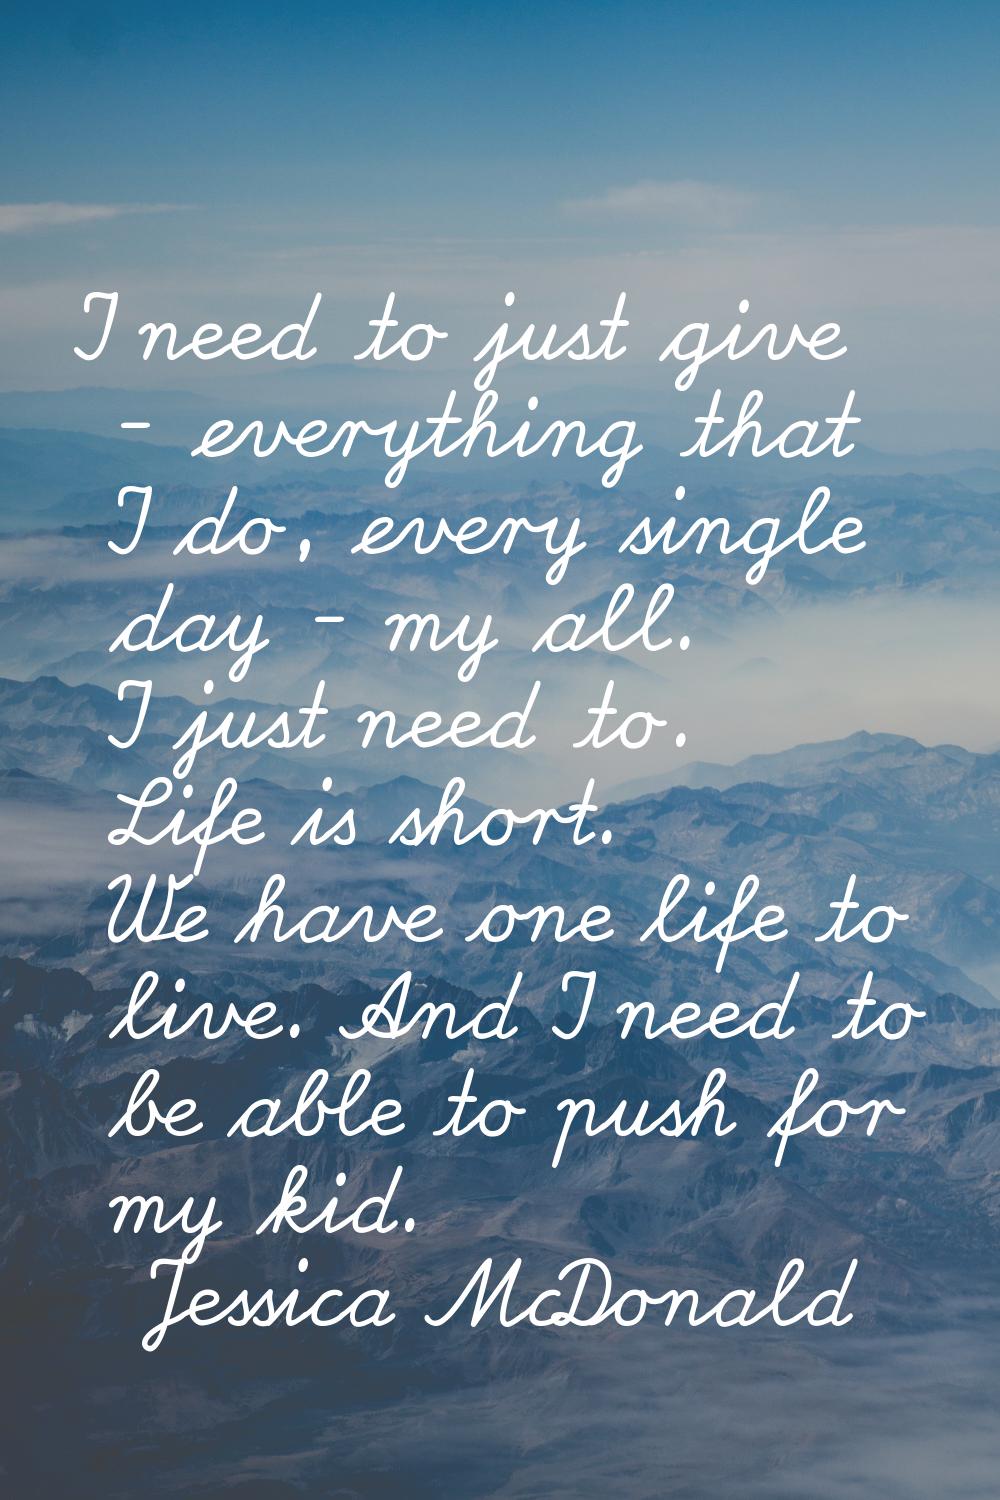 I need to just give - everything that I do, every single day - my all. I just need to. Life is shor